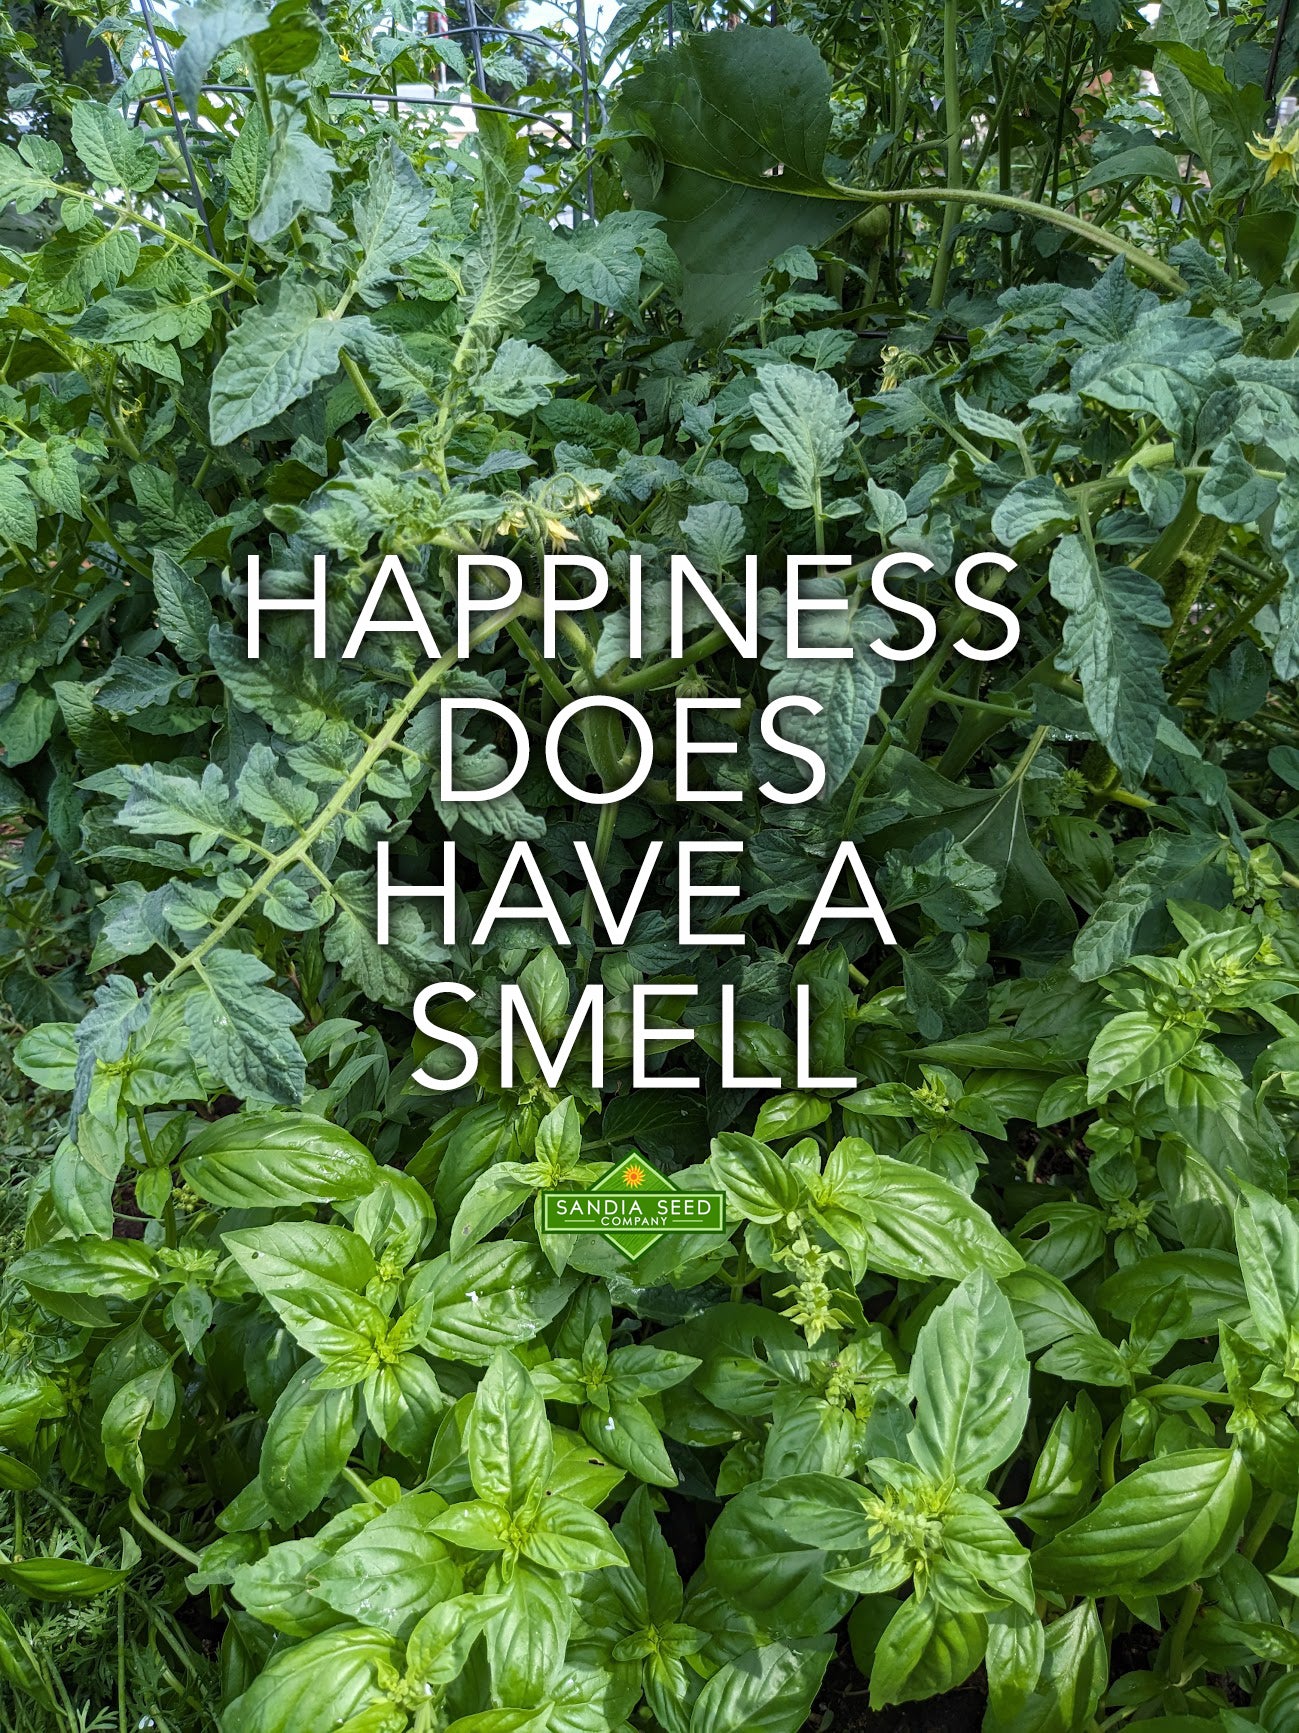 Herb Seeds for Sale: Happiness does have a smell.